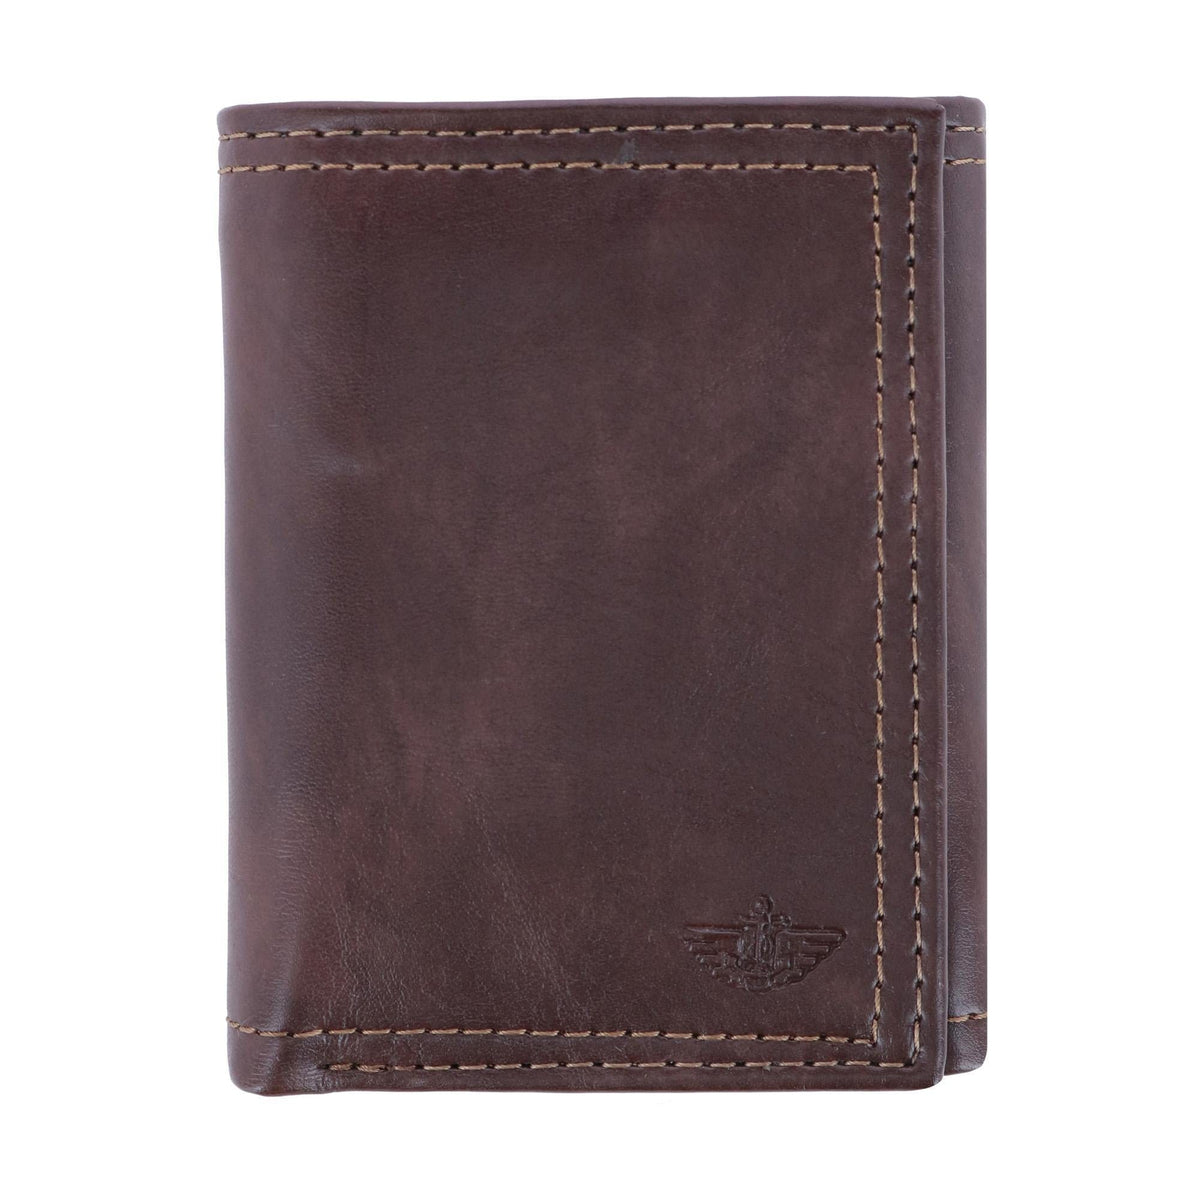 Men's Leather RFID Trifold Wallet by Dockers | Trifold Wallets at ...